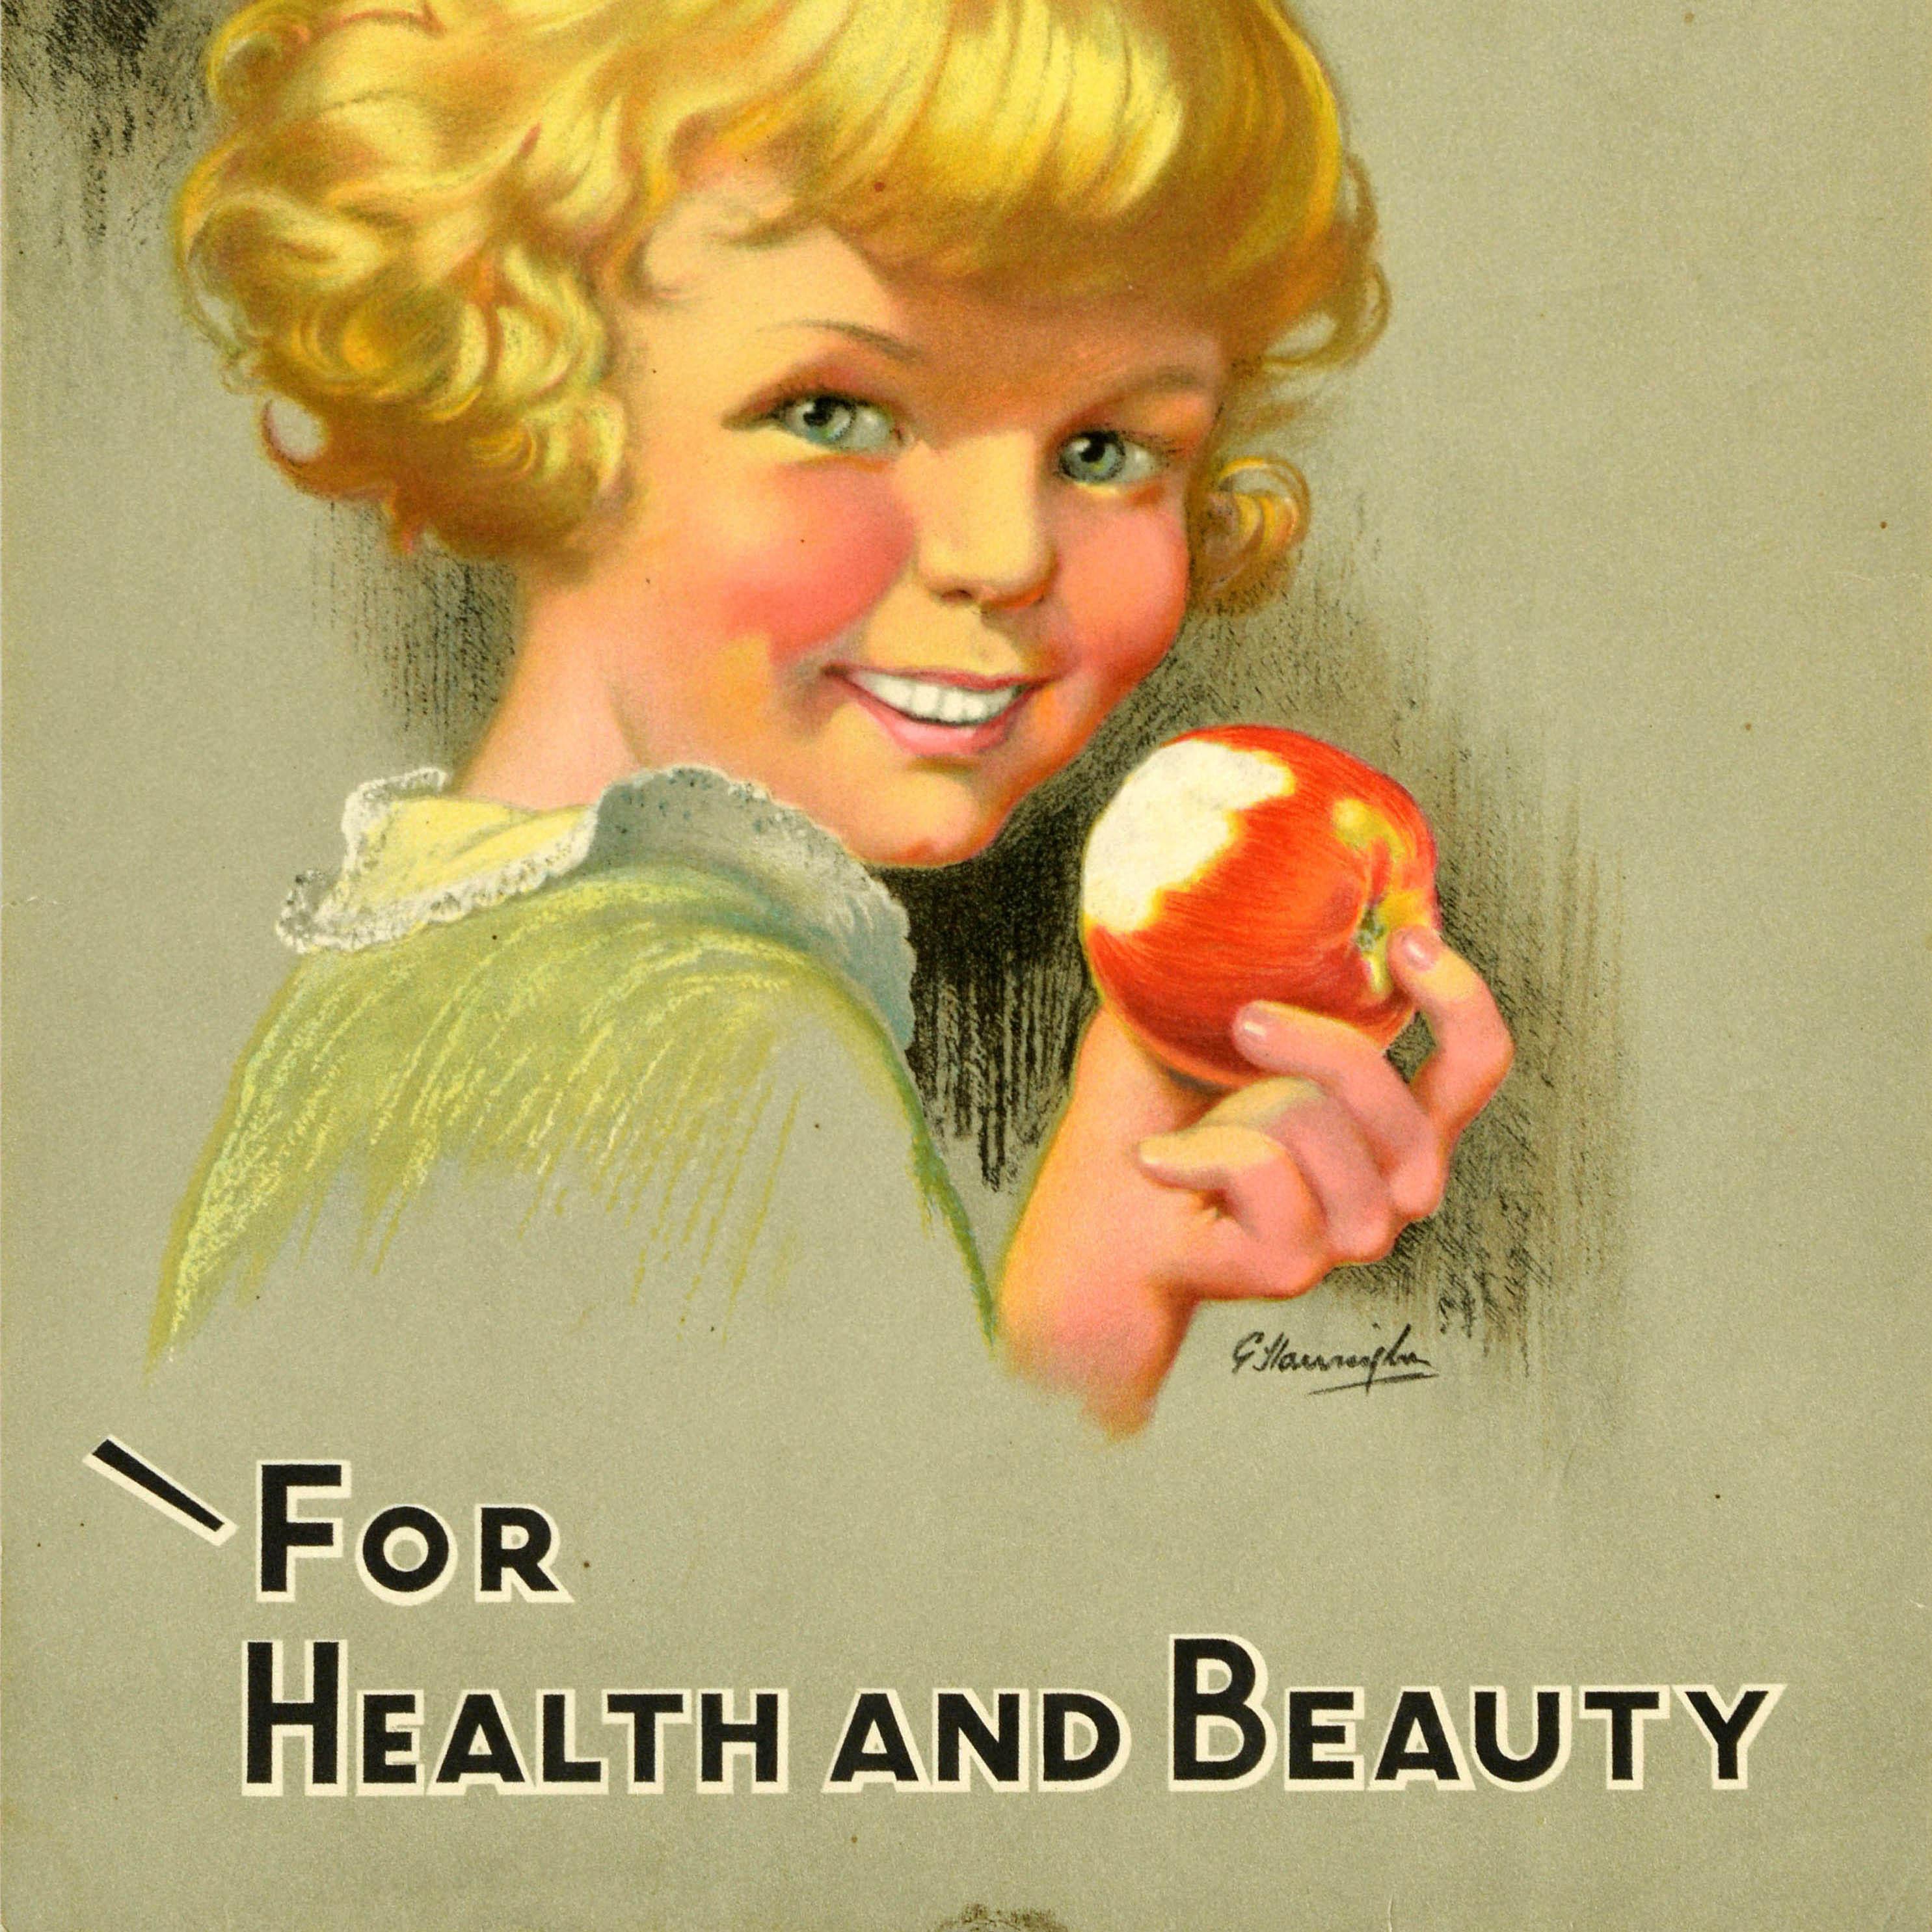 Original Vintage Food Advertising Poster Canadian Apples For Health And Beauty For Sale 1